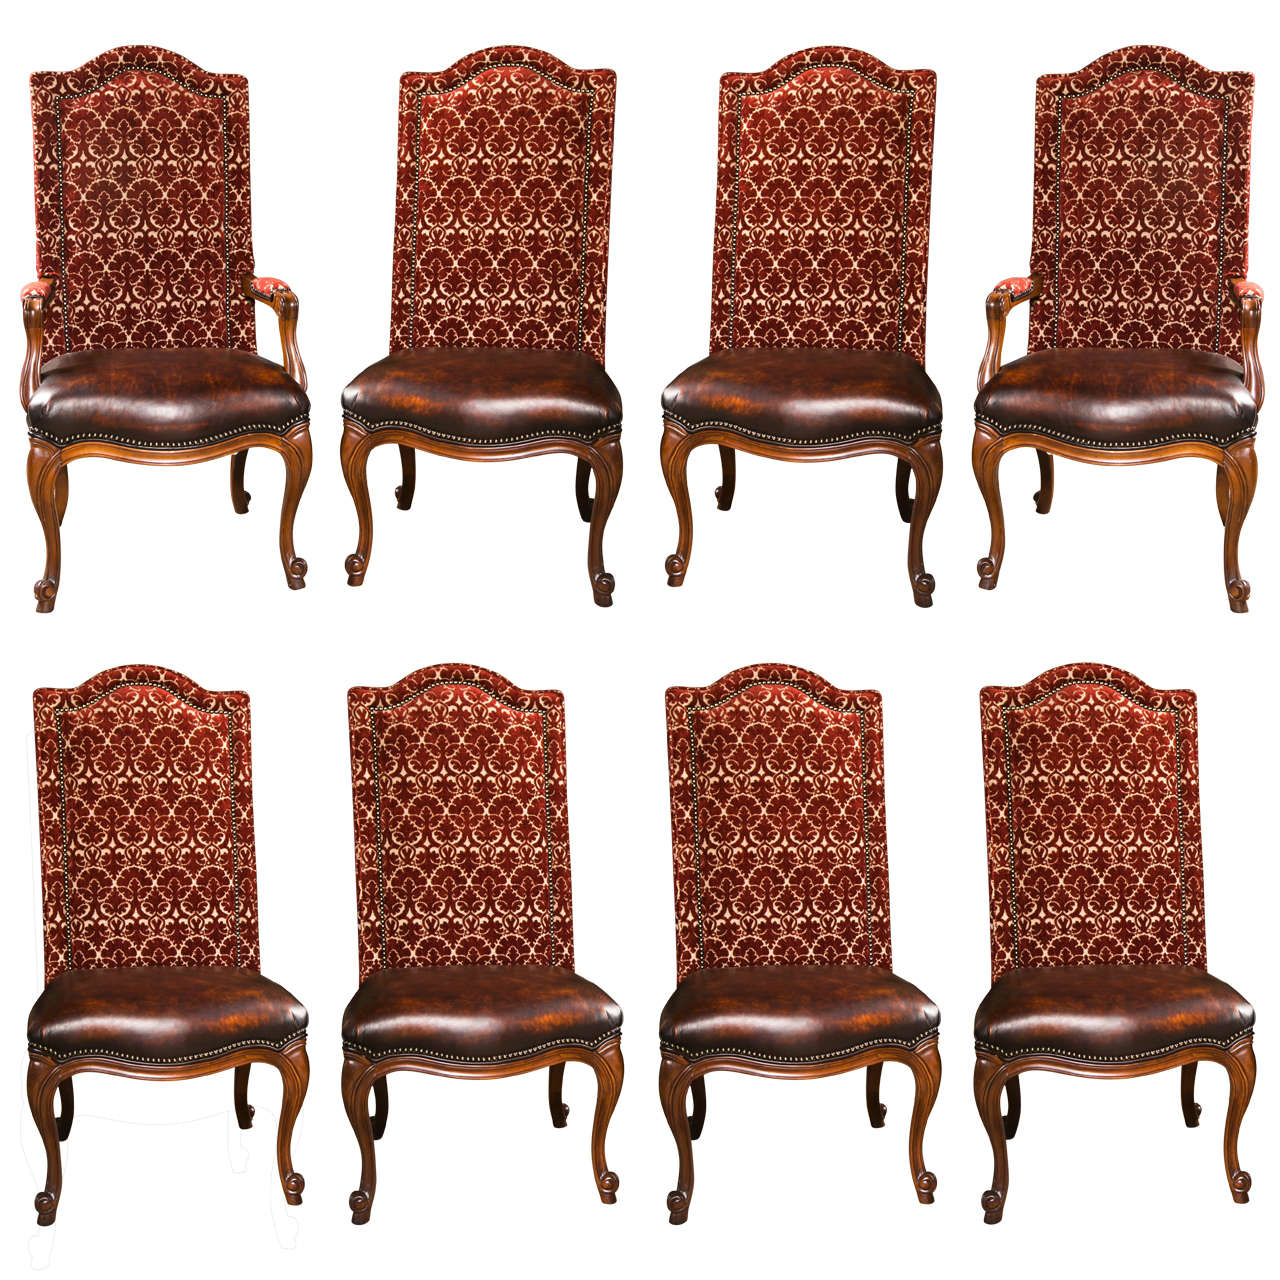 Set of 8 French Provincial Style High-back Dining Chairs